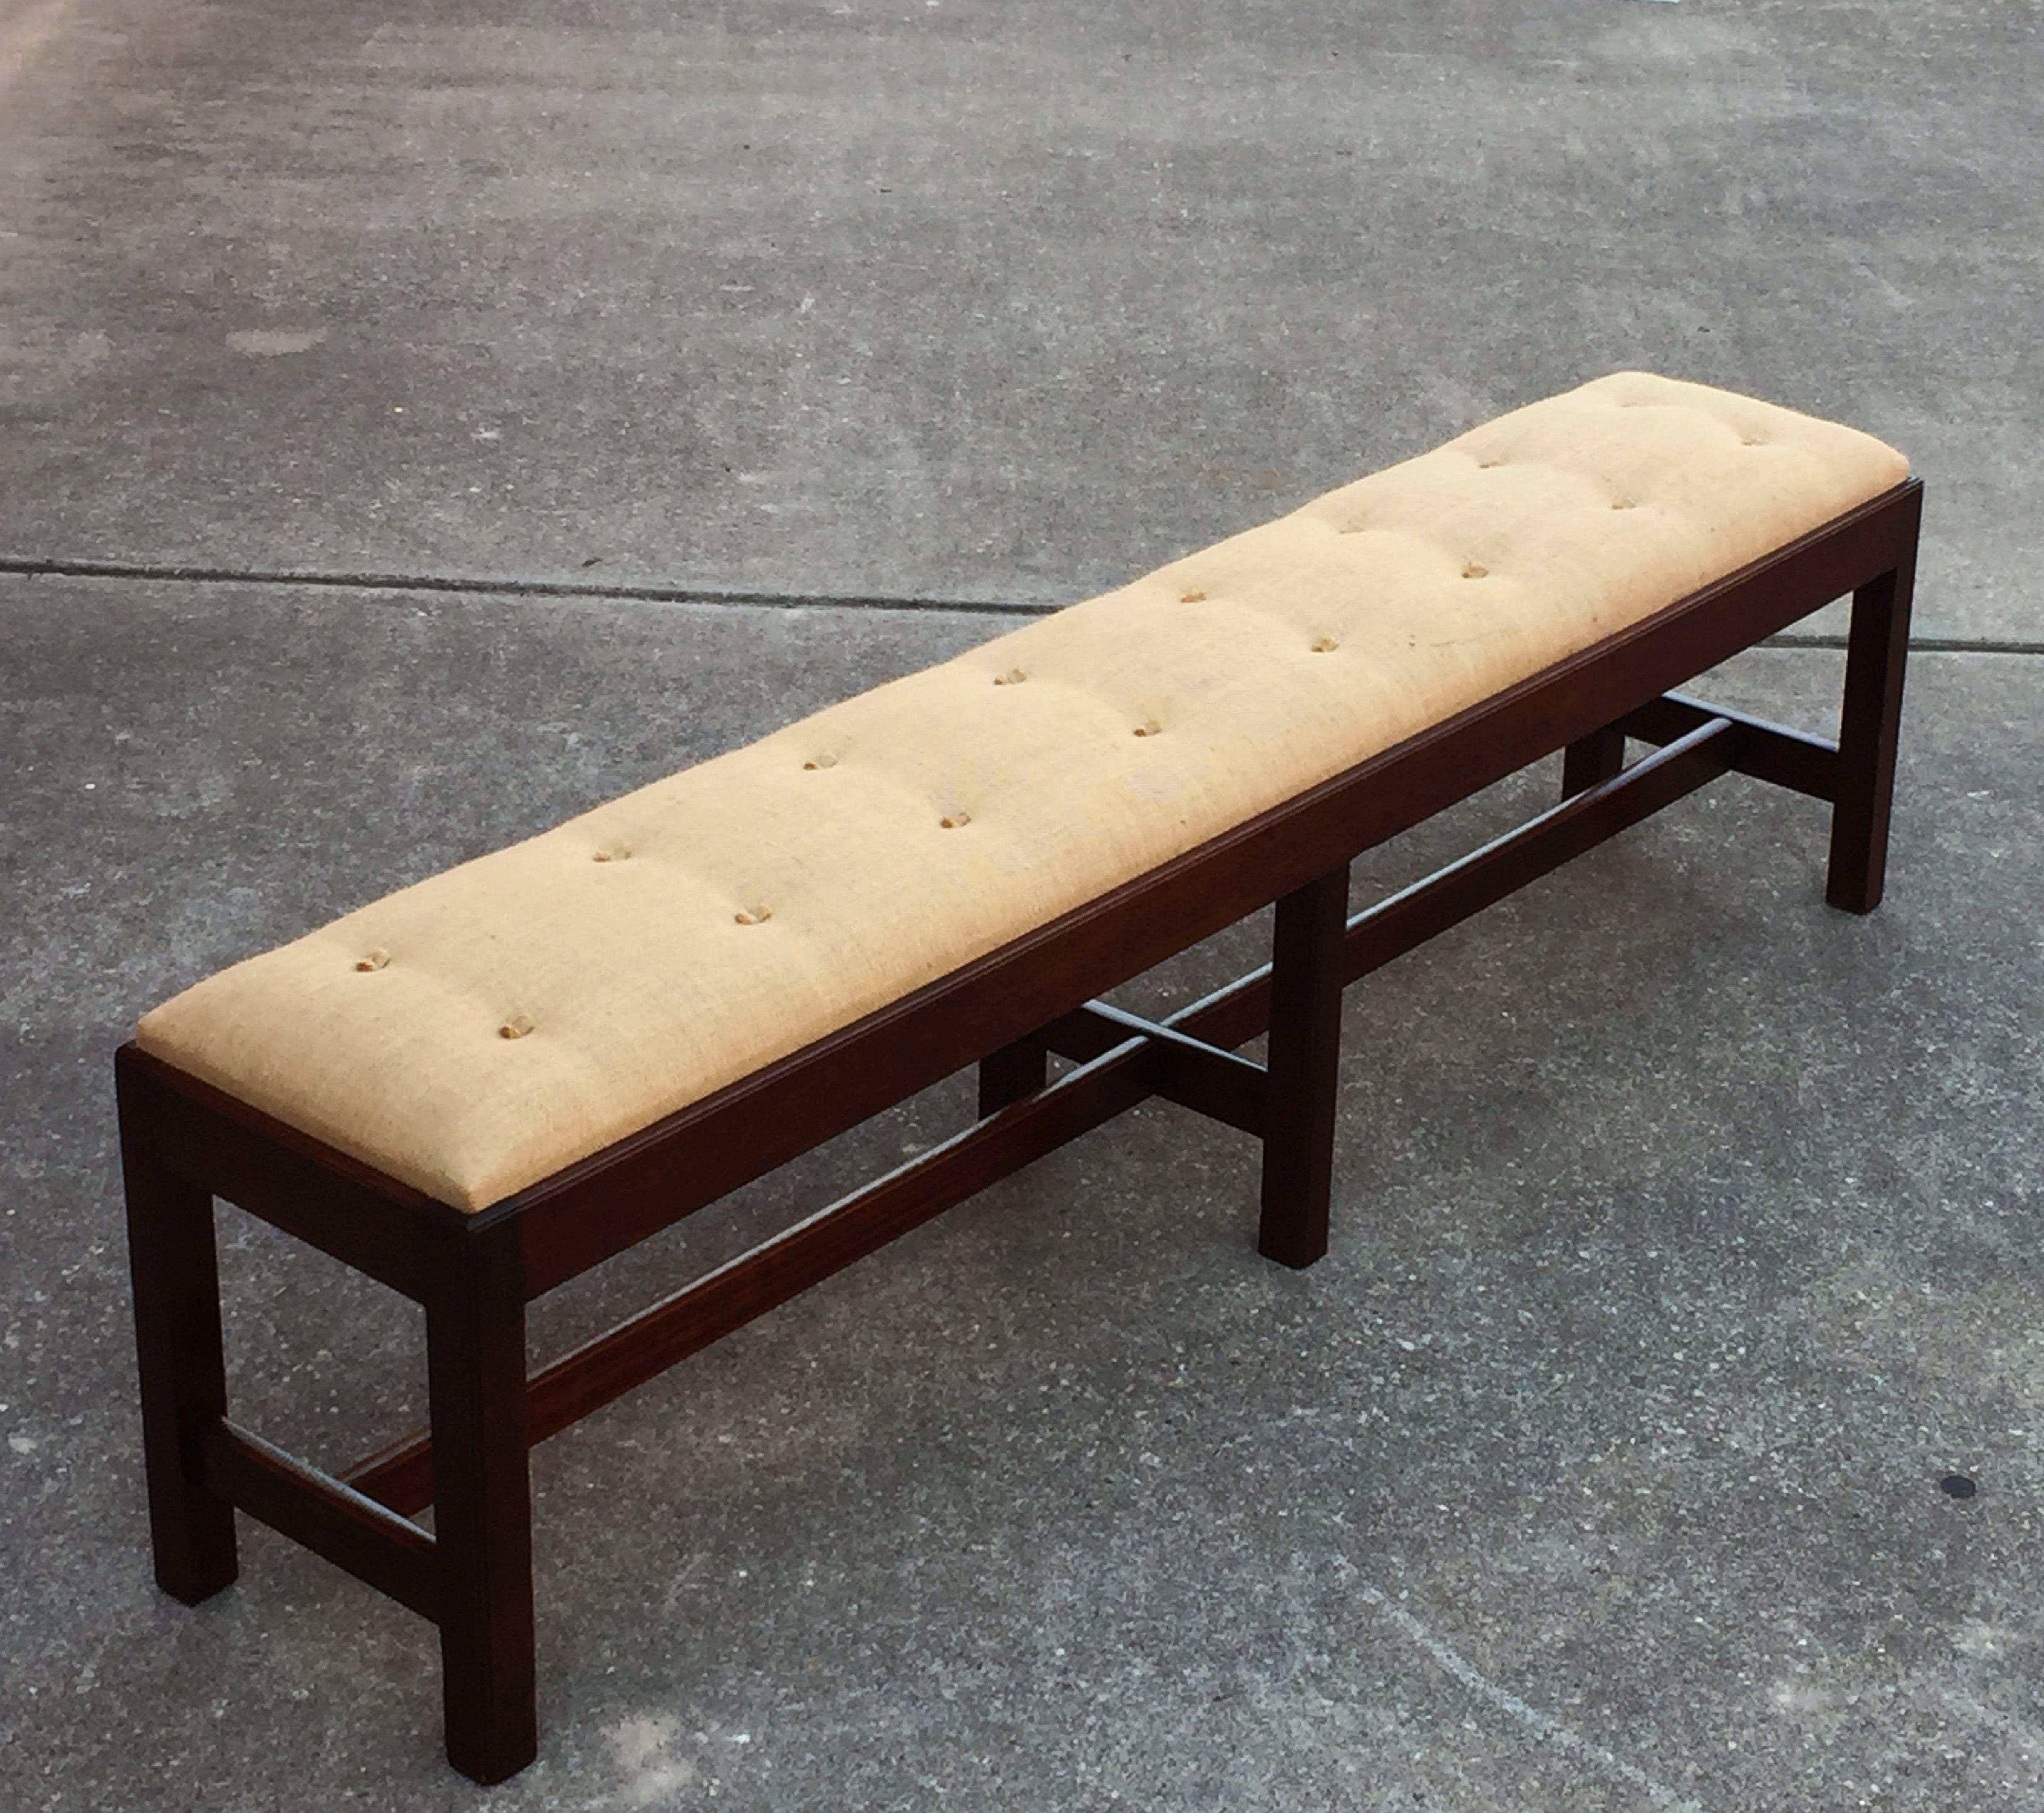 Chippendale English Upholstered Long Bench or Seat of Mahogany with Tufted Cushion Top